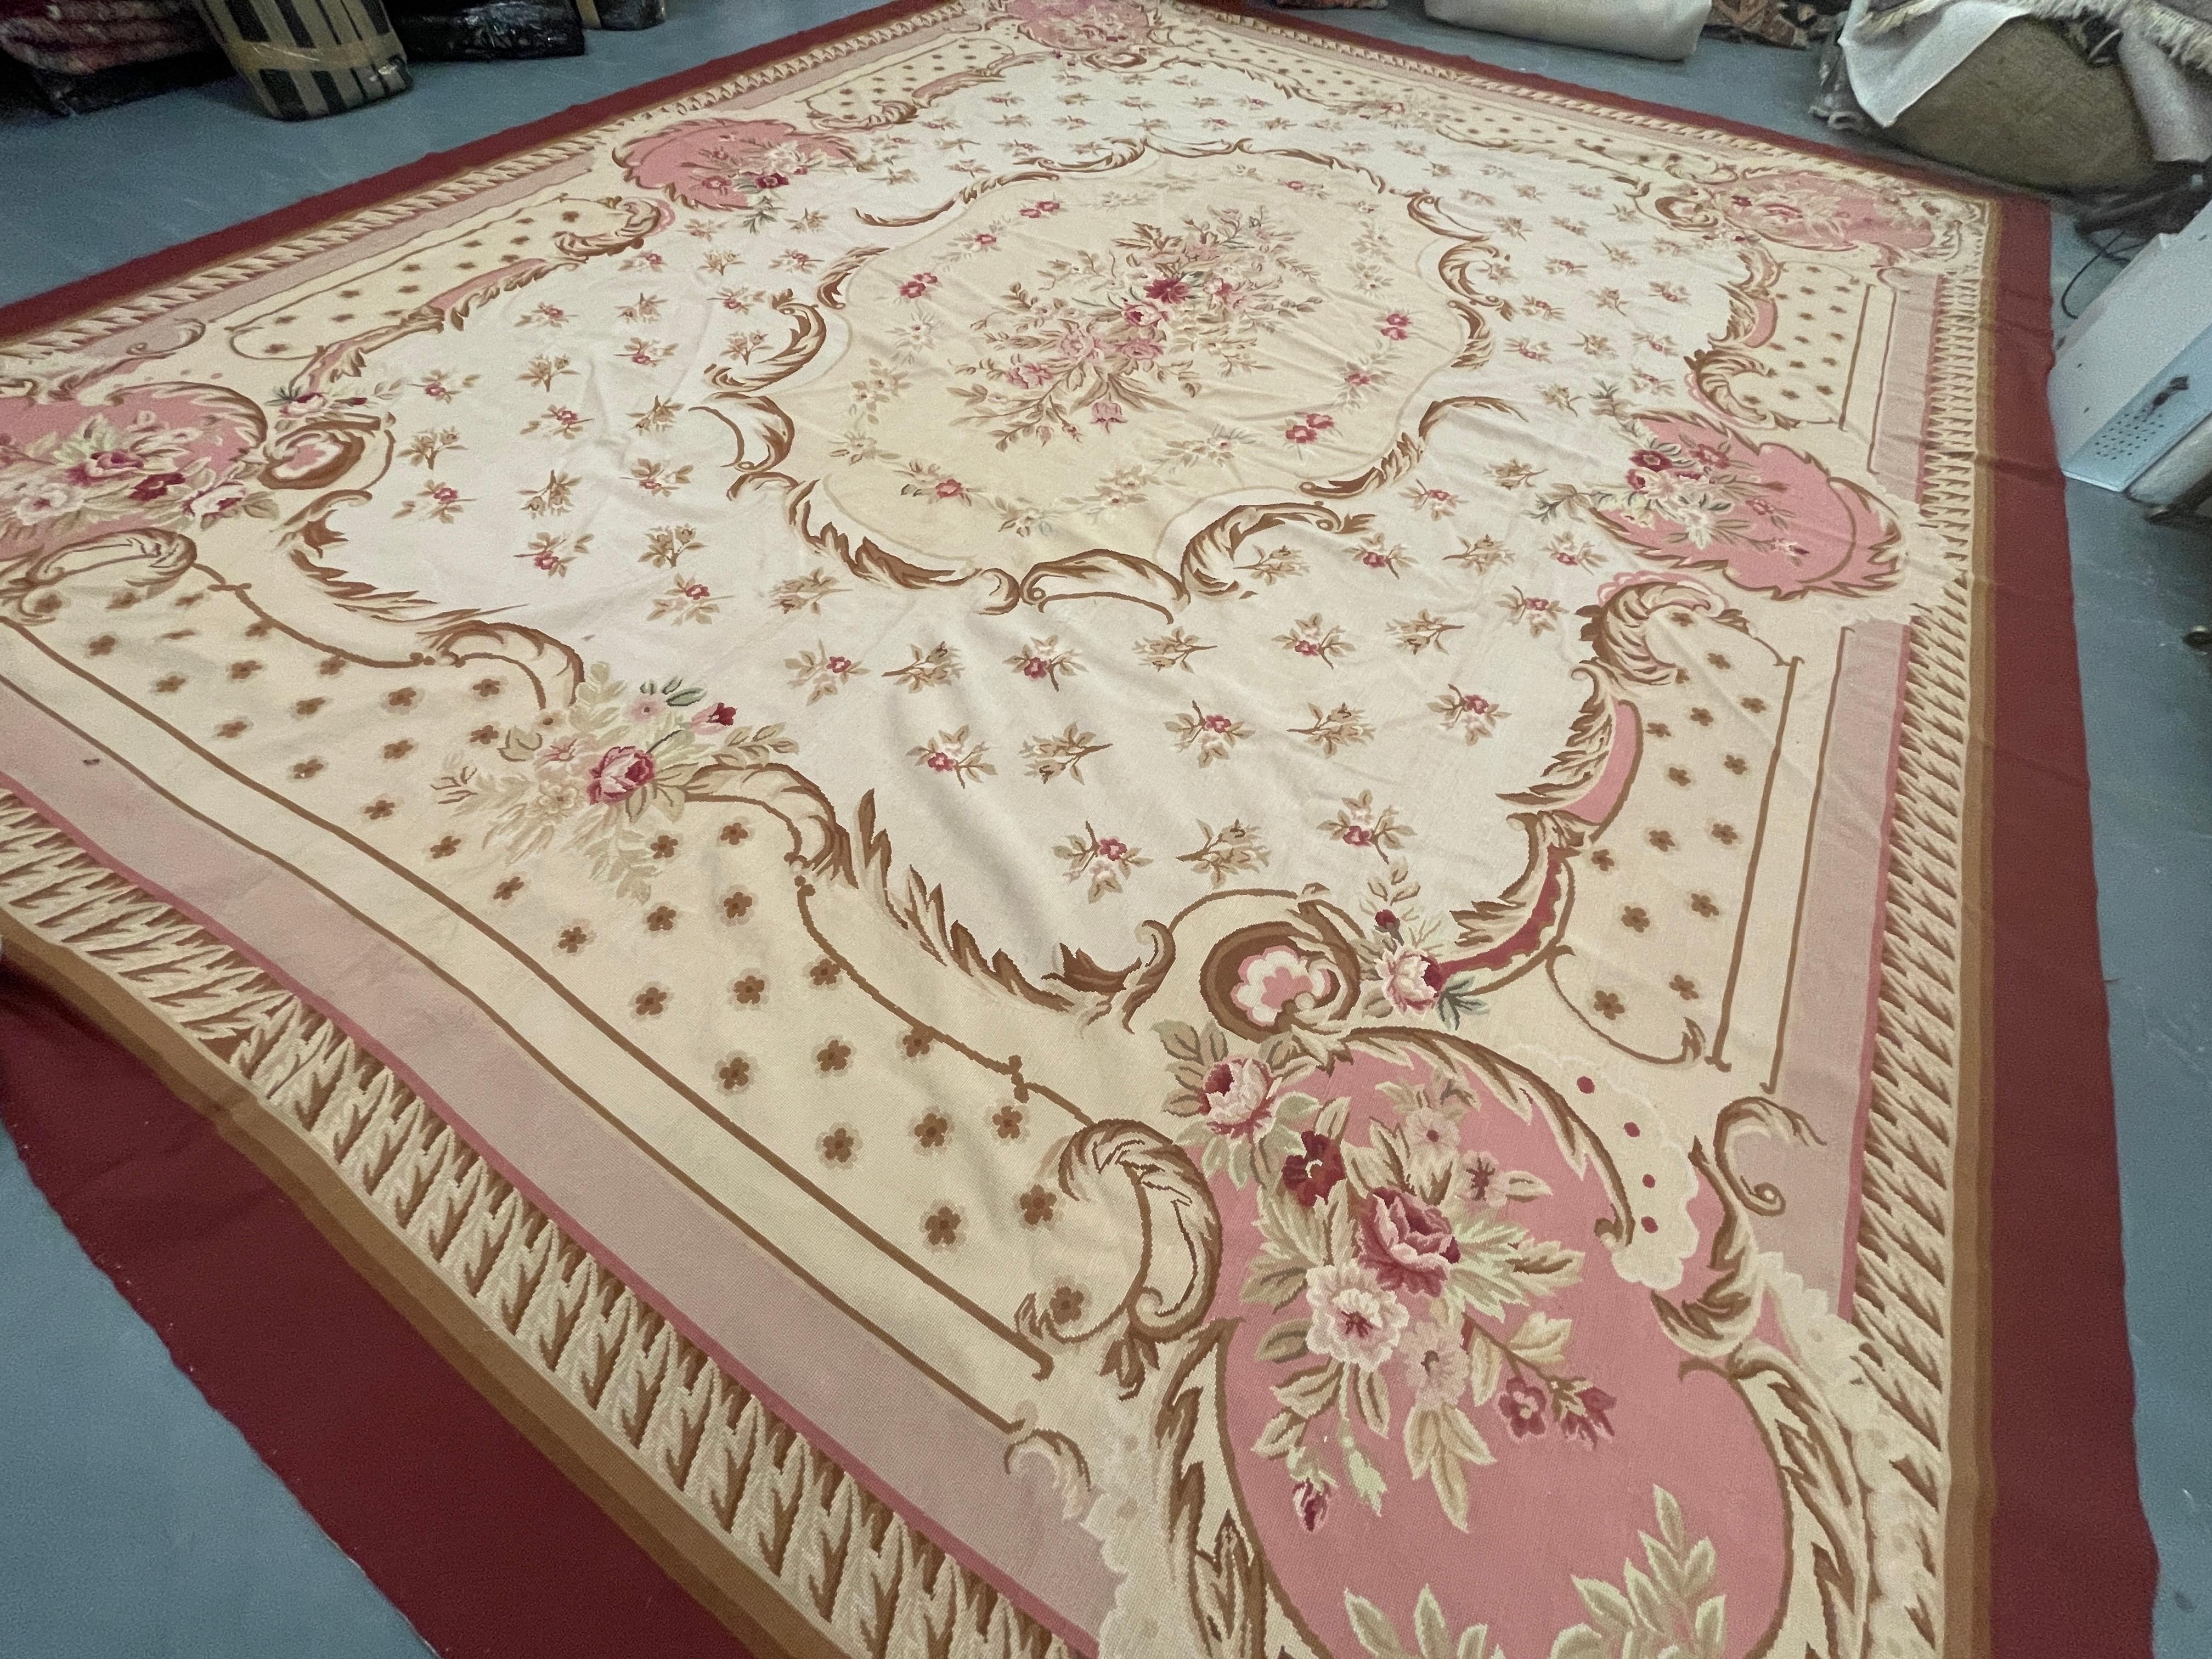 Featuring intricately woven motifs and emblems on a mixture of beige and pink backgrounds through the centre. A highly detailed layered border then encloses the handmade Aubusson carpet.
This high-quality French Aubusson rug is perfect for modern